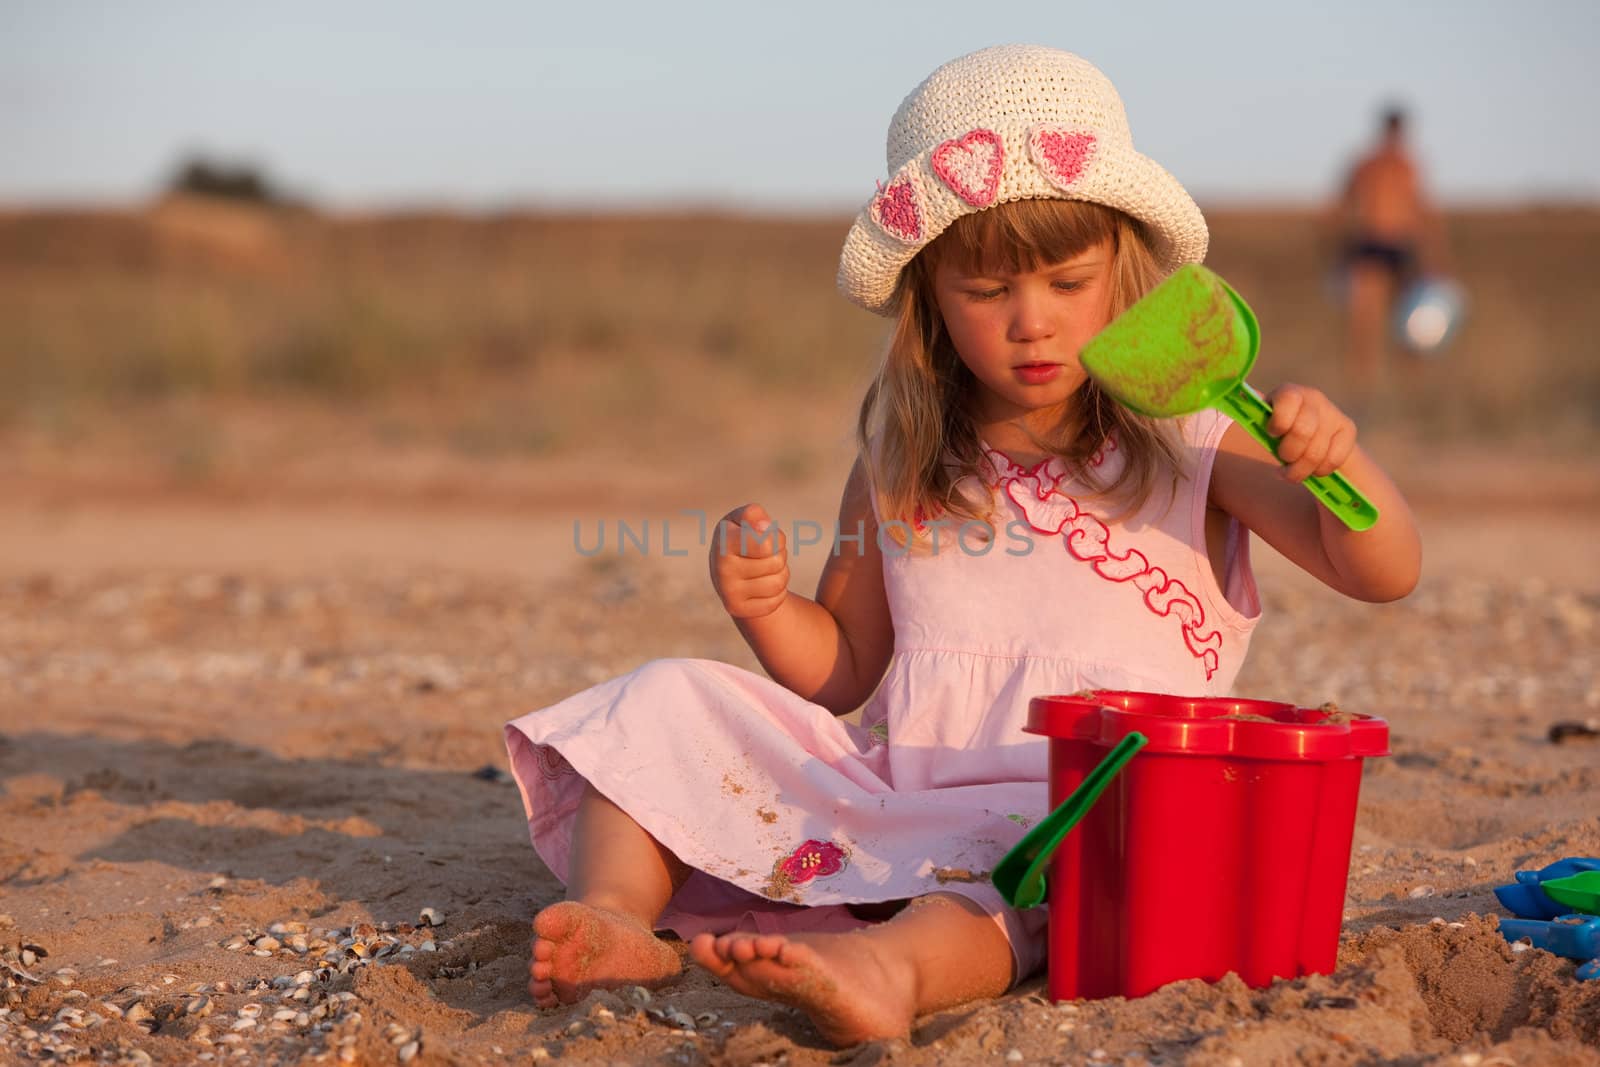 people series: little girl in bonnet are play the game